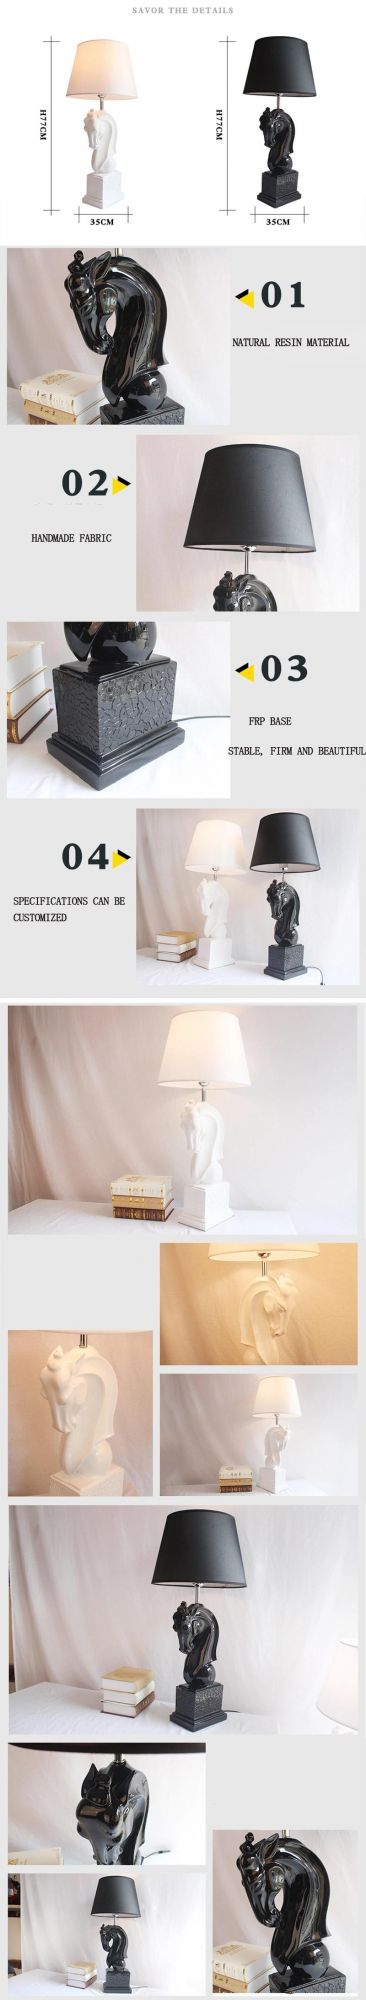 Hot Sale European Furniture Modern Fashion White Marble Base Round Table Lamp for Hotel Home Decoration